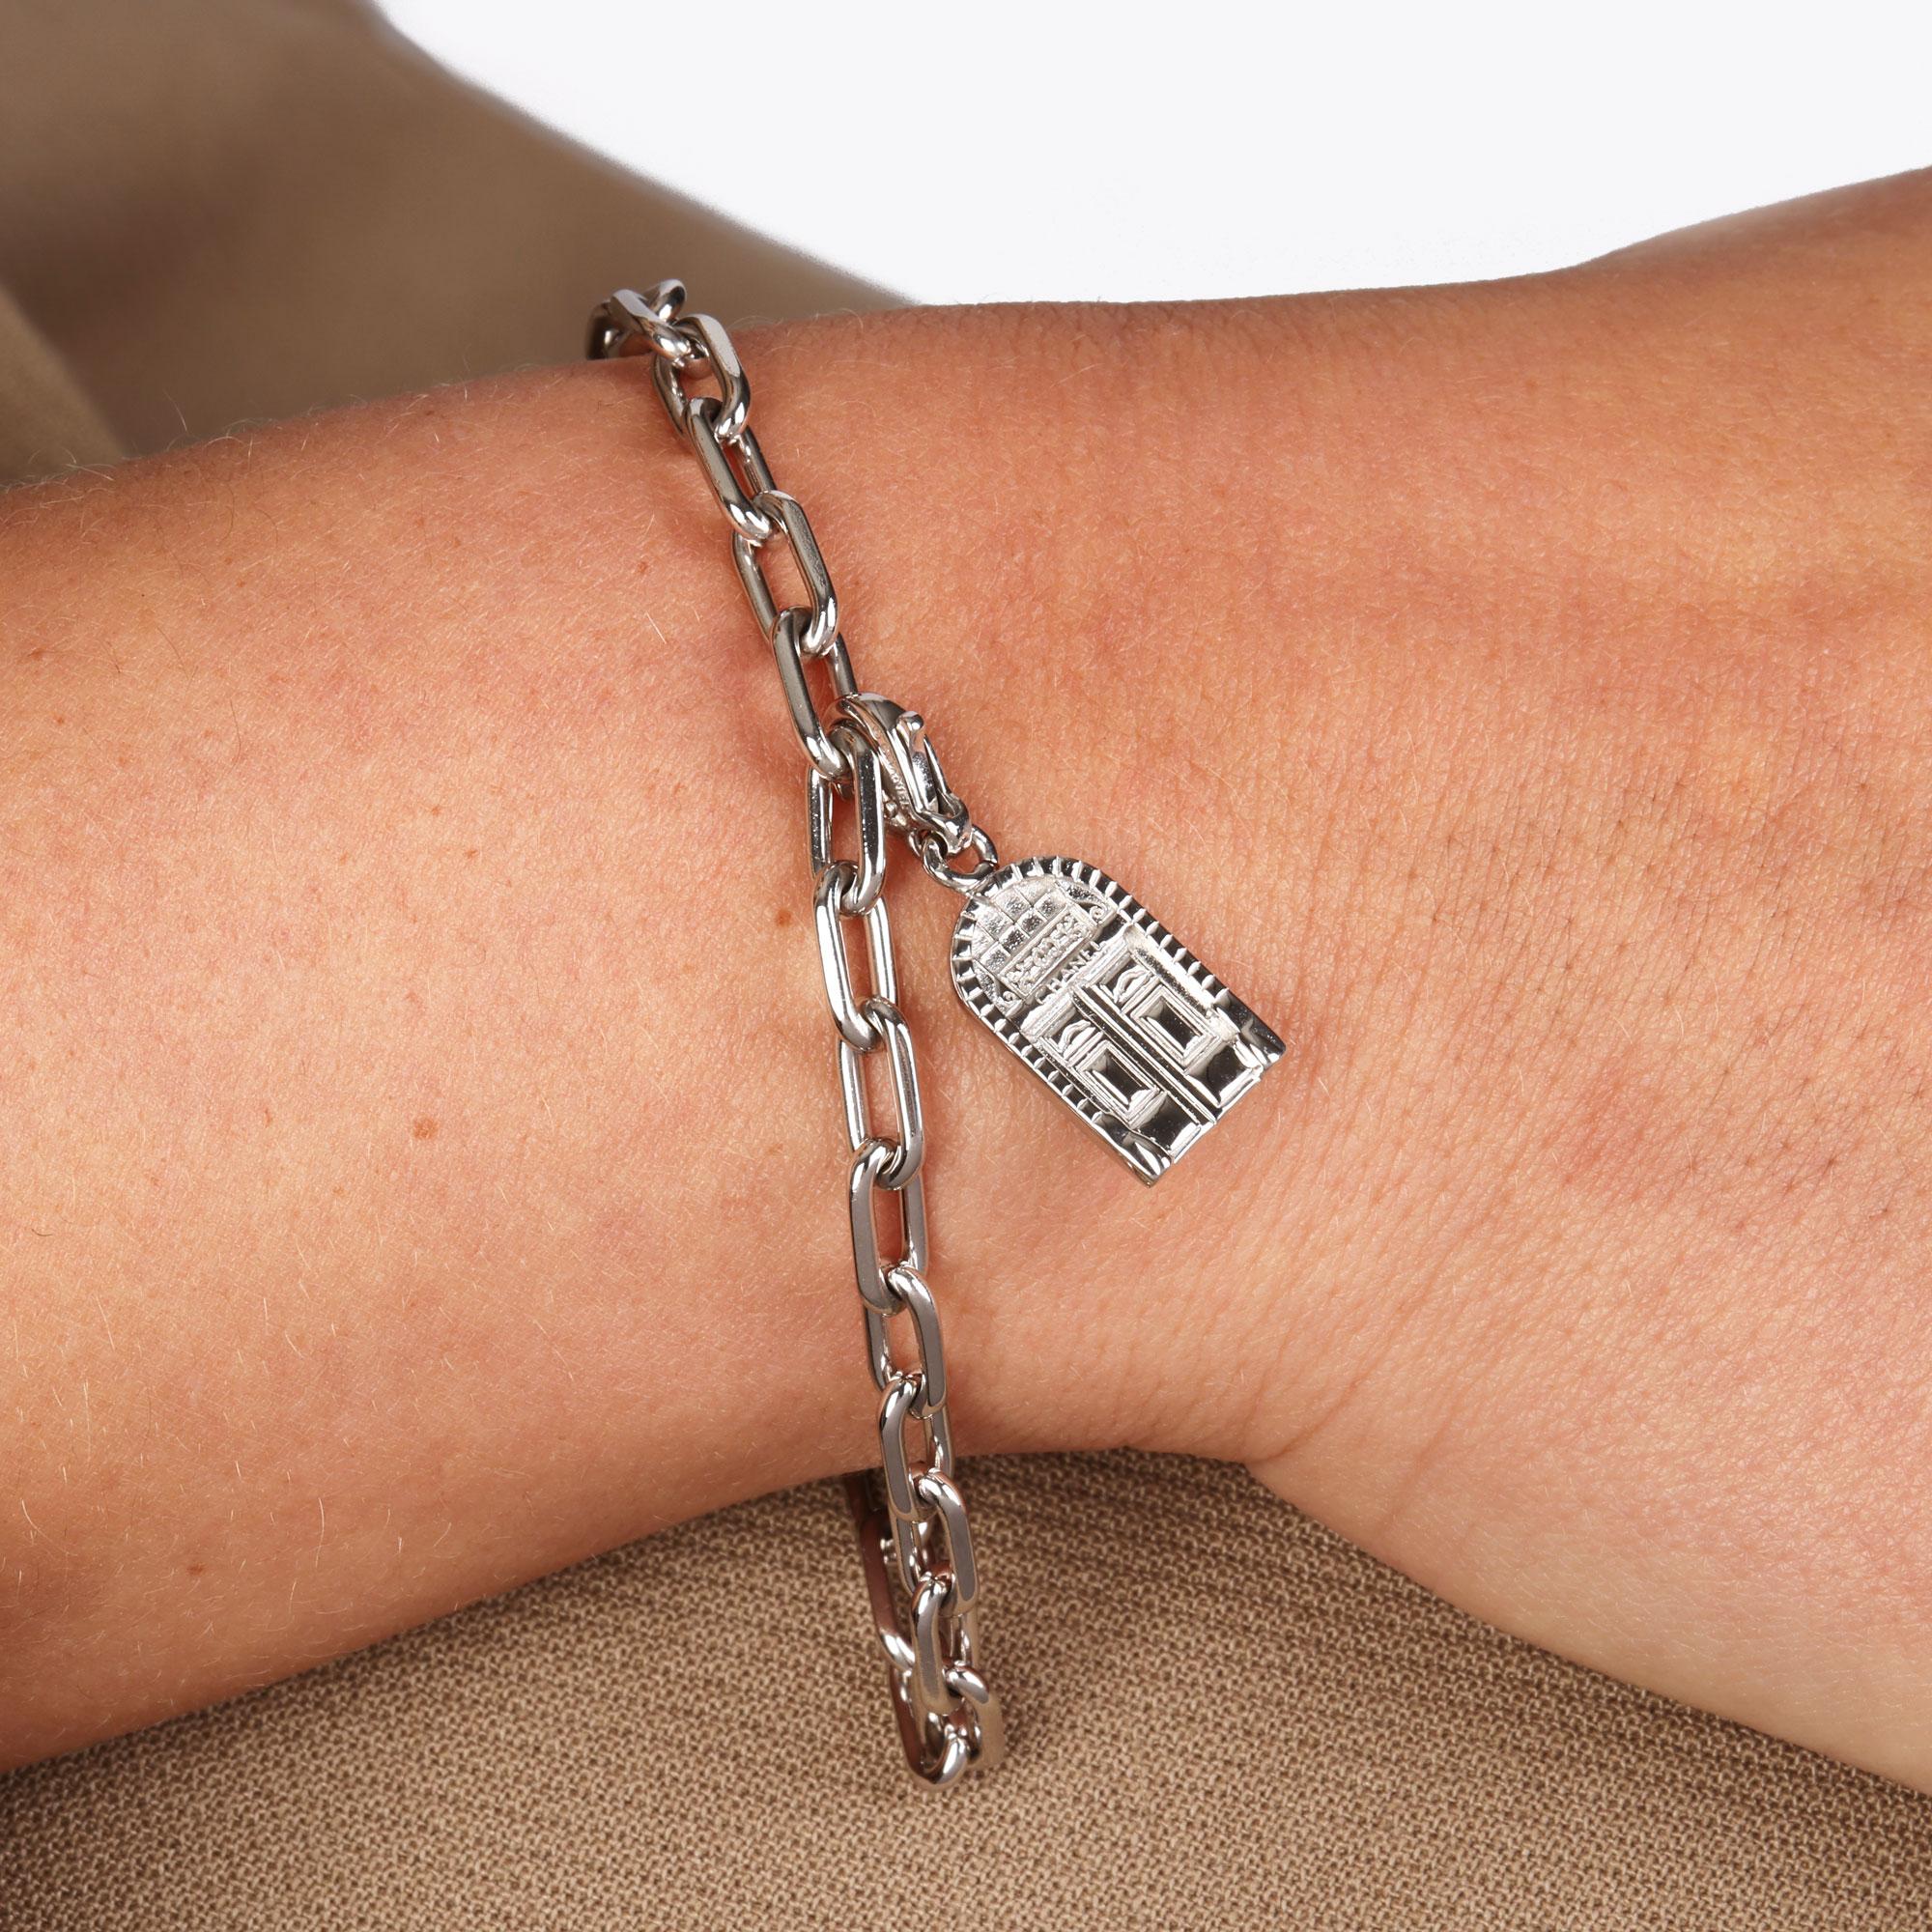 This charm by Chanel features a door design with the number 18 in 18ct White Gold. It can be worn as a charm on a bracelet or as a pendant on a necklace. Accompanied by a Chanel Certificate. 
ITEM